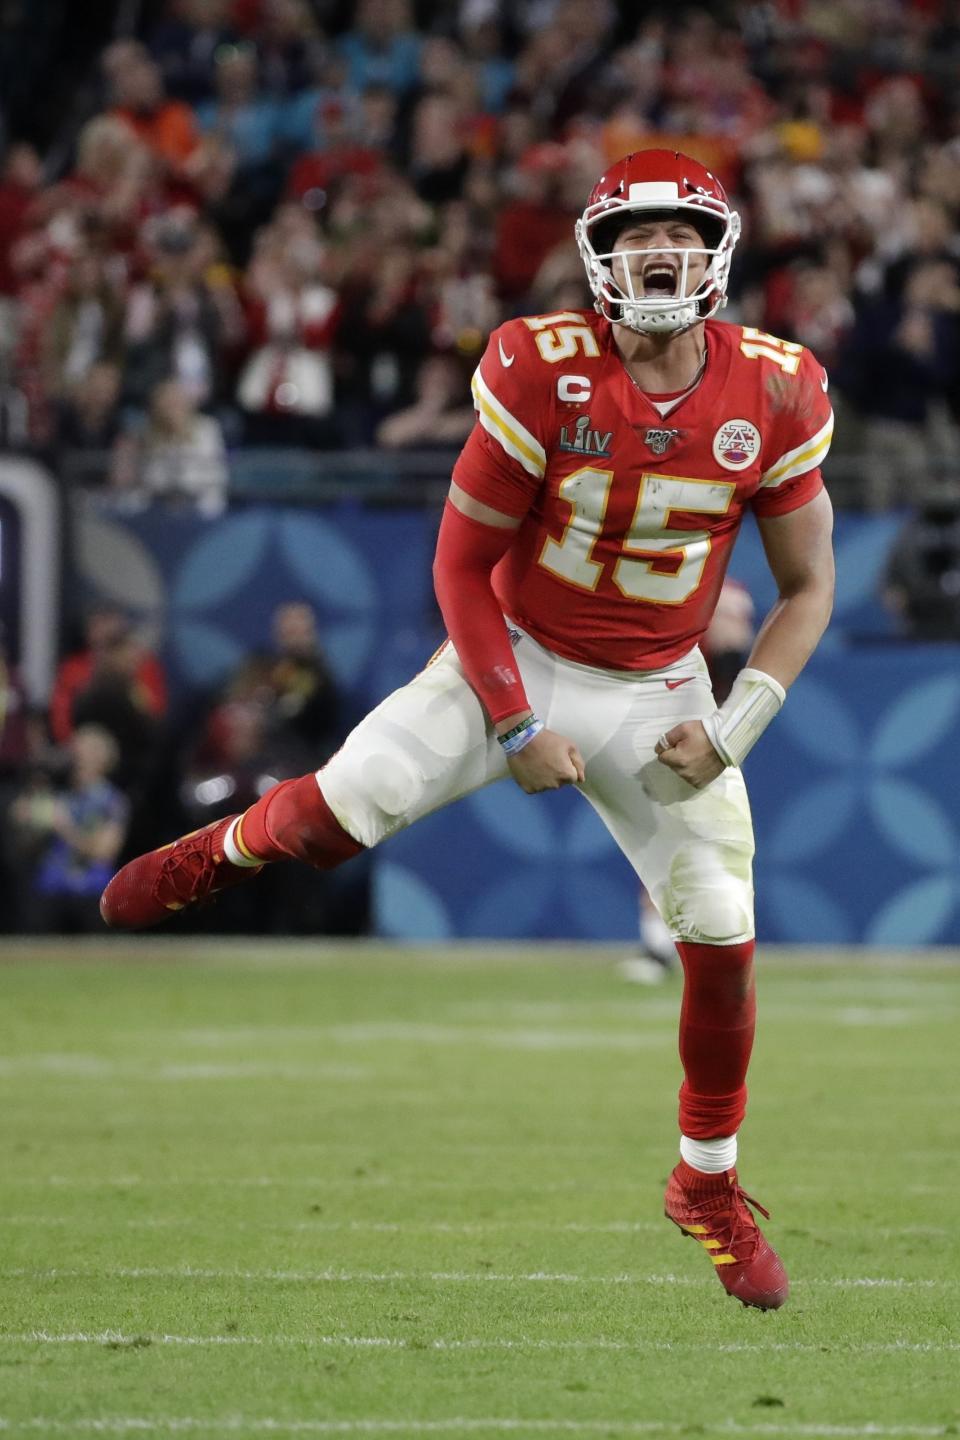 FILE - Kansas City Chiefs quarterback Patrick Mahomes (15) celebrates a long pass against the San Francisco 49ers during the second half of the NFL Super Bowl 54 football game Sunday, Feb. 2, 2020, in Miami Gardens, Fla. The success stories are the reason why teams keep coming back hoping to get their franchise-lifting quarterback success story like Patrick Mahomes, Josh Allen, Lamar Jackson or Joe Burrow. (AP Photo/Wilfredo Lee, File)